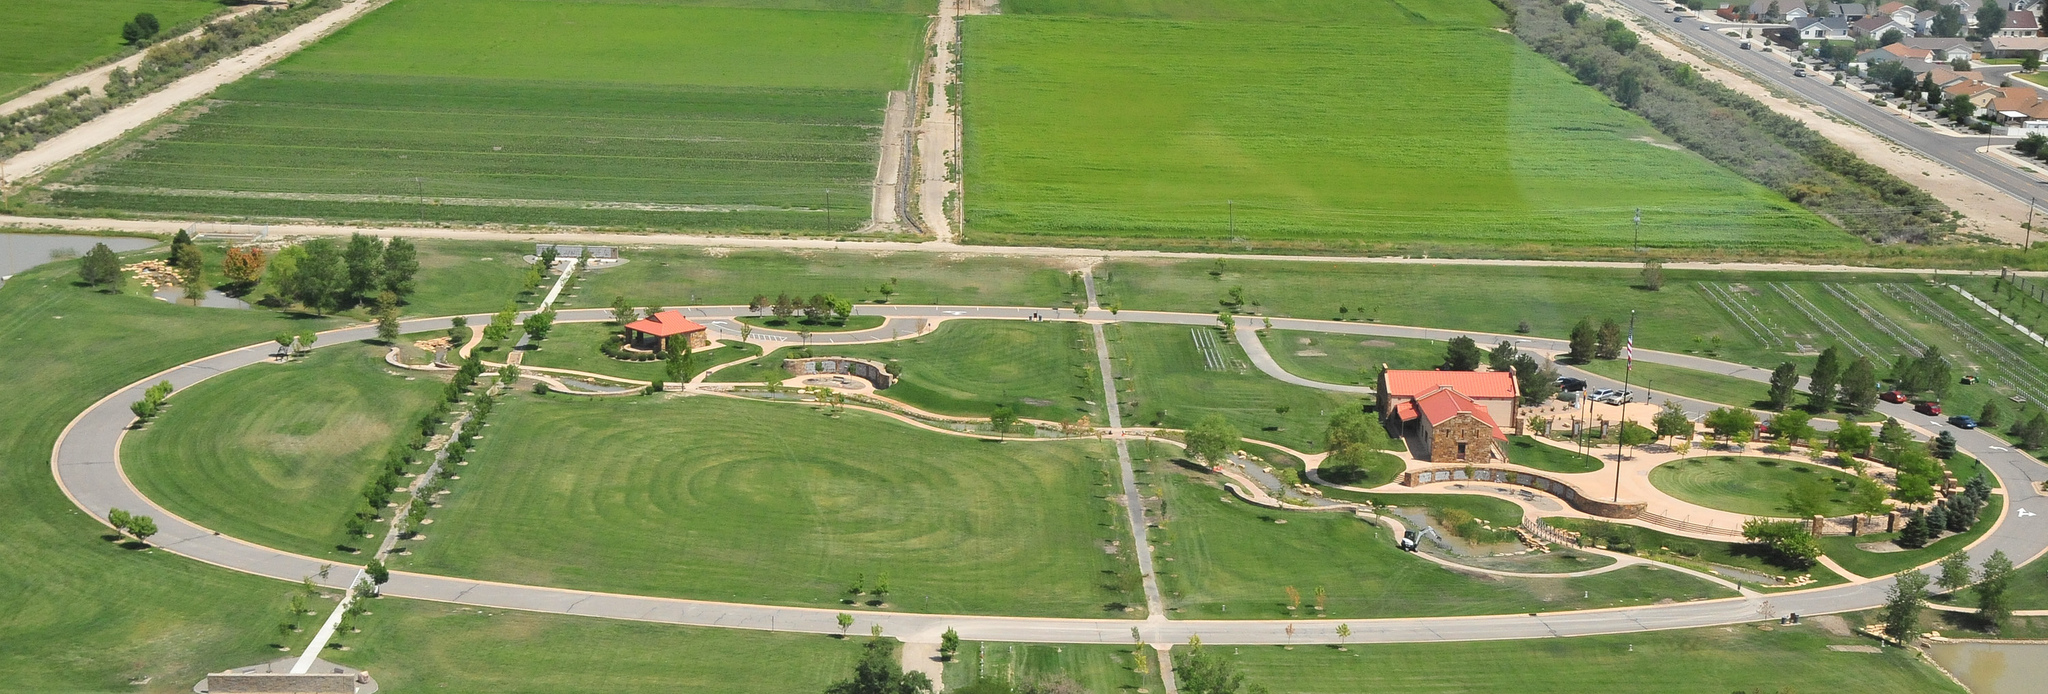 Cemetery arial view